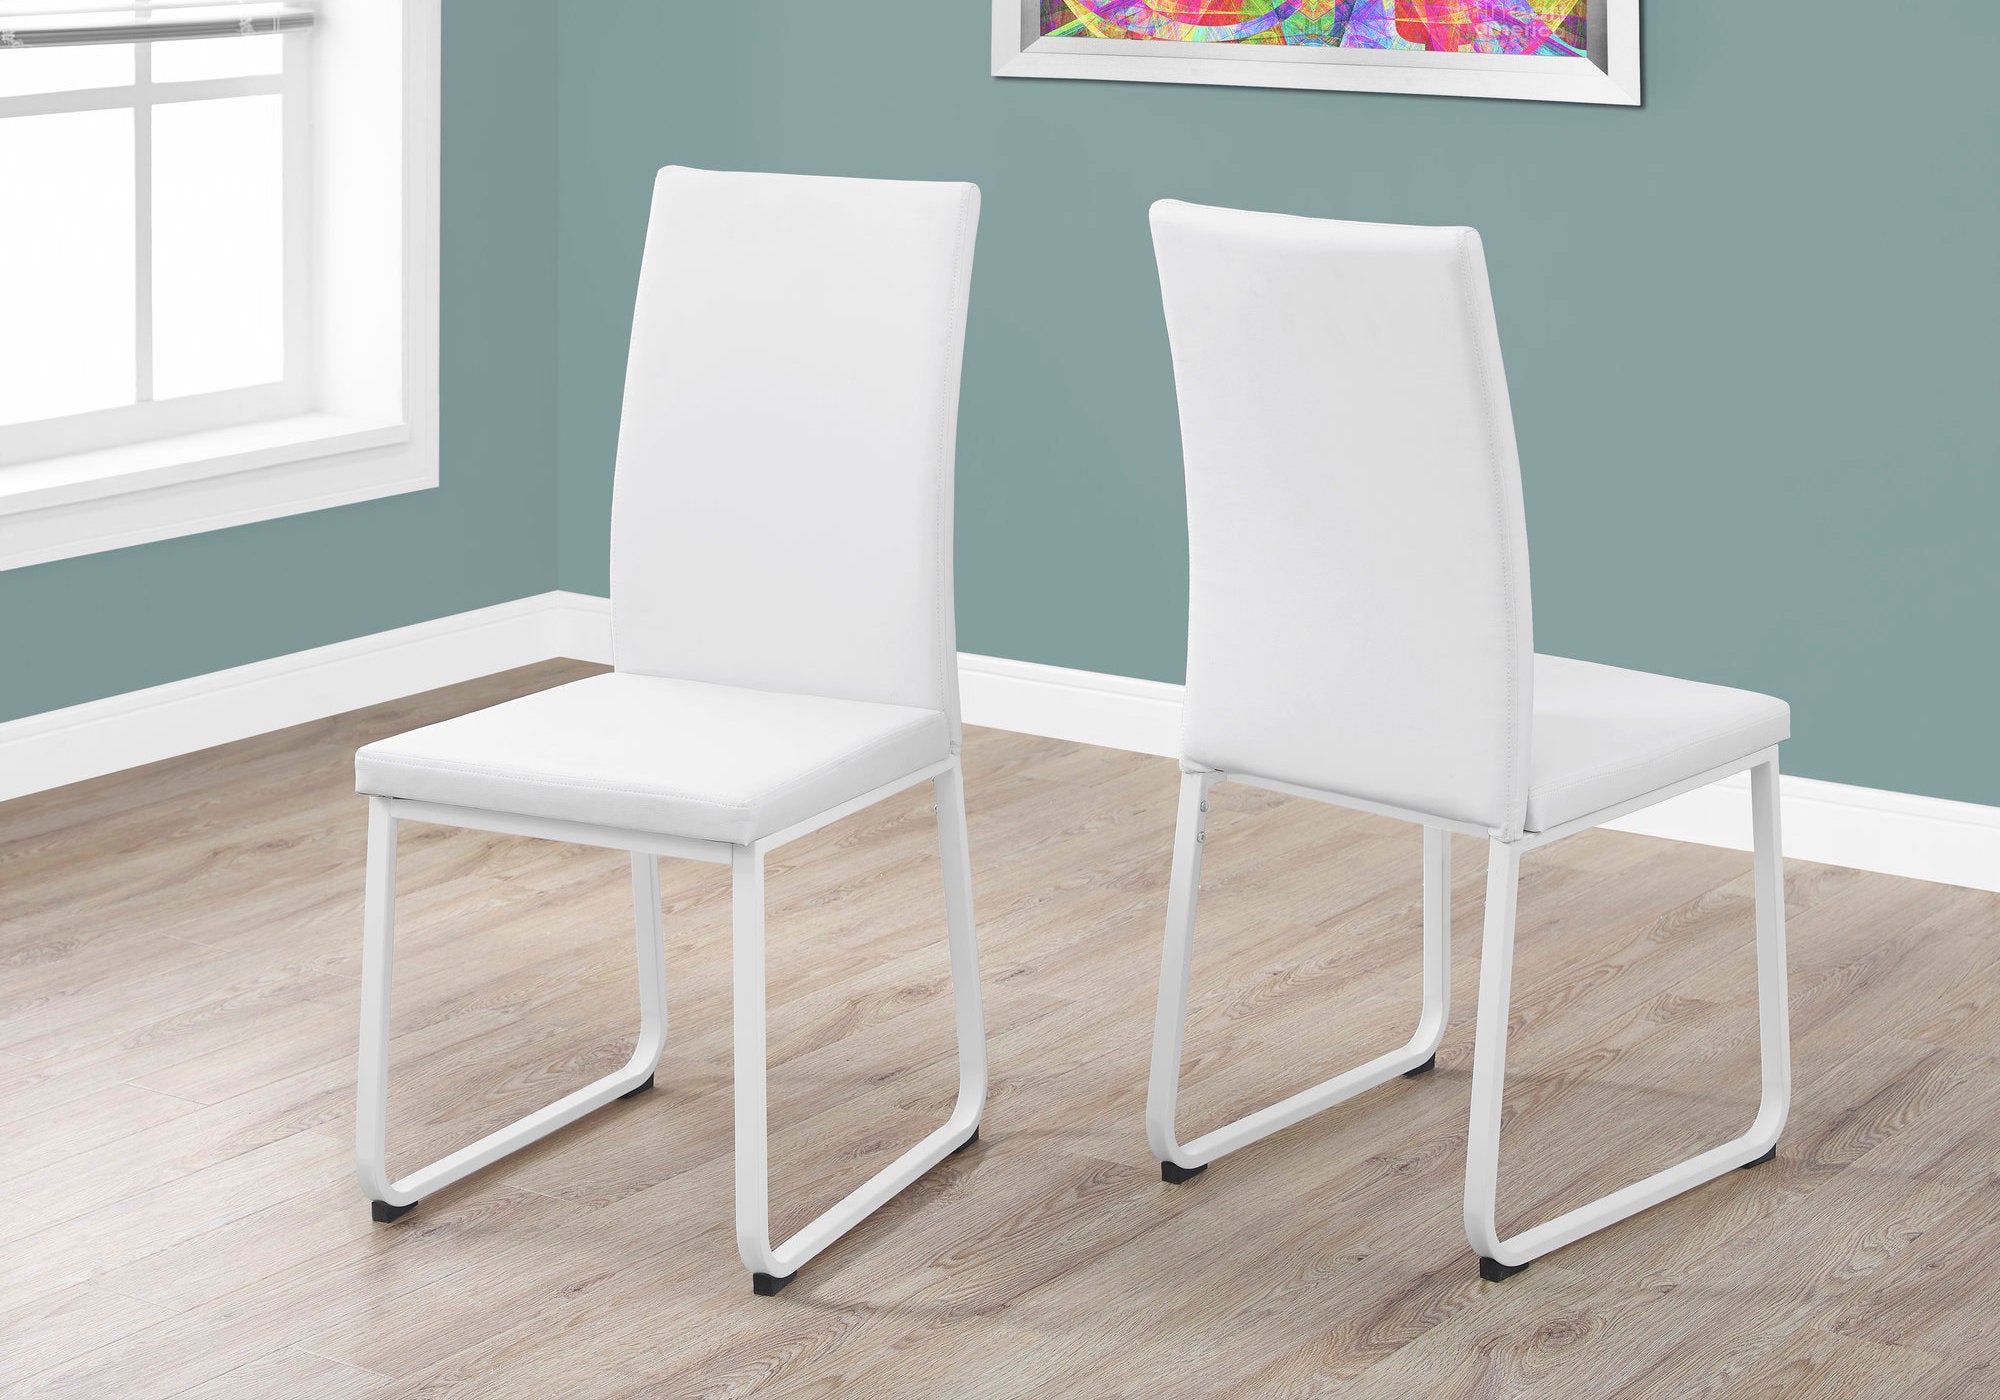 Alijandro PU Leather 38"H Dining Chair (Set of 2 - White)